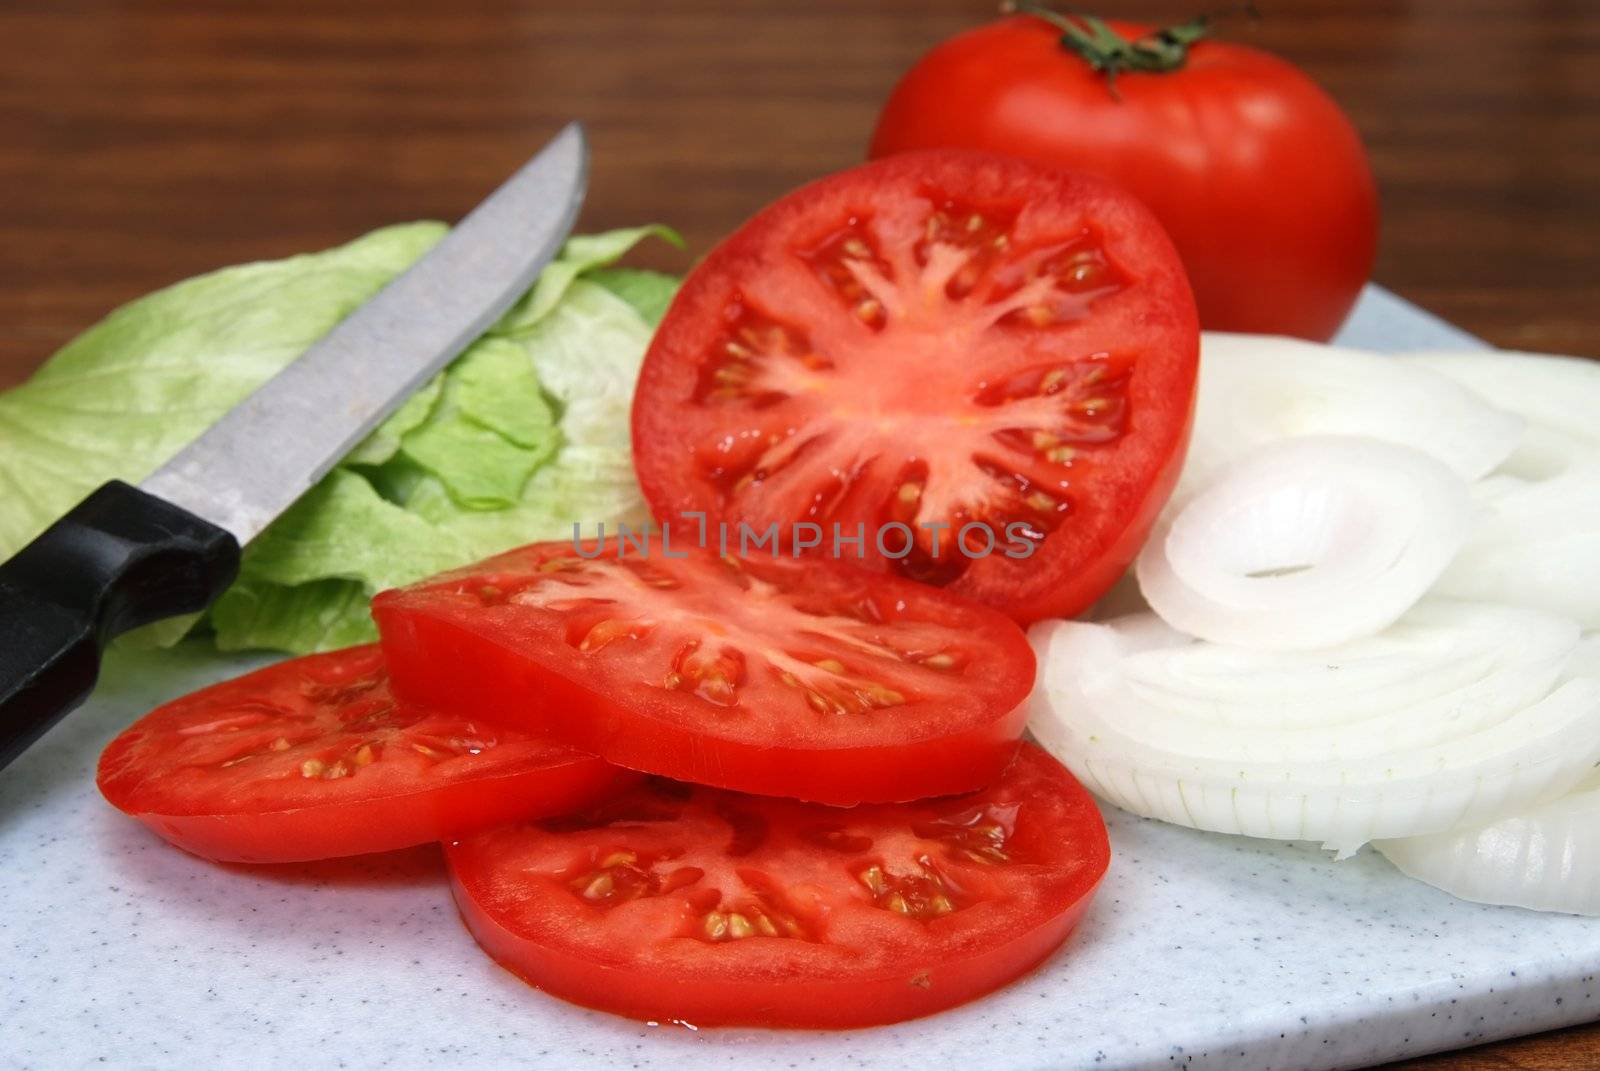 Tomato, lettuce, onions, and knife on cutting board.  Shallow depth of field.